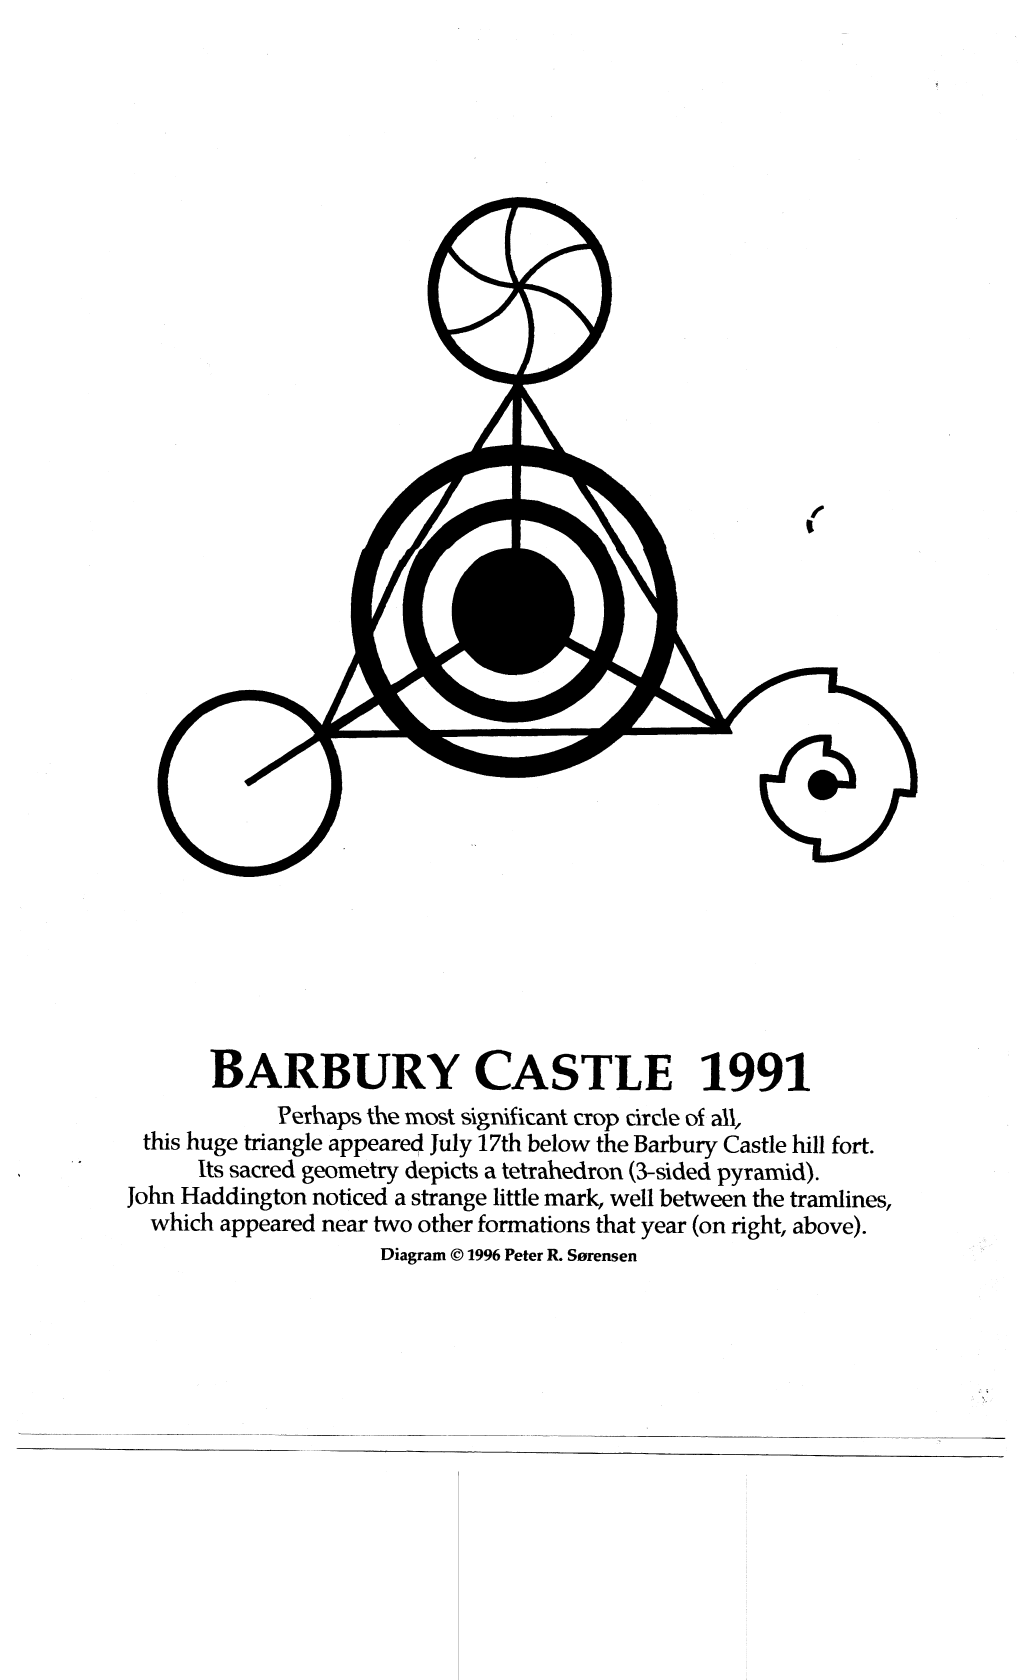 BARBURY CASTLE 1991 Perhaps the Most Significant Crop Circle of All, This Huge Triangle Appeared July 17Th Below the Barbury Castle Hill Fort